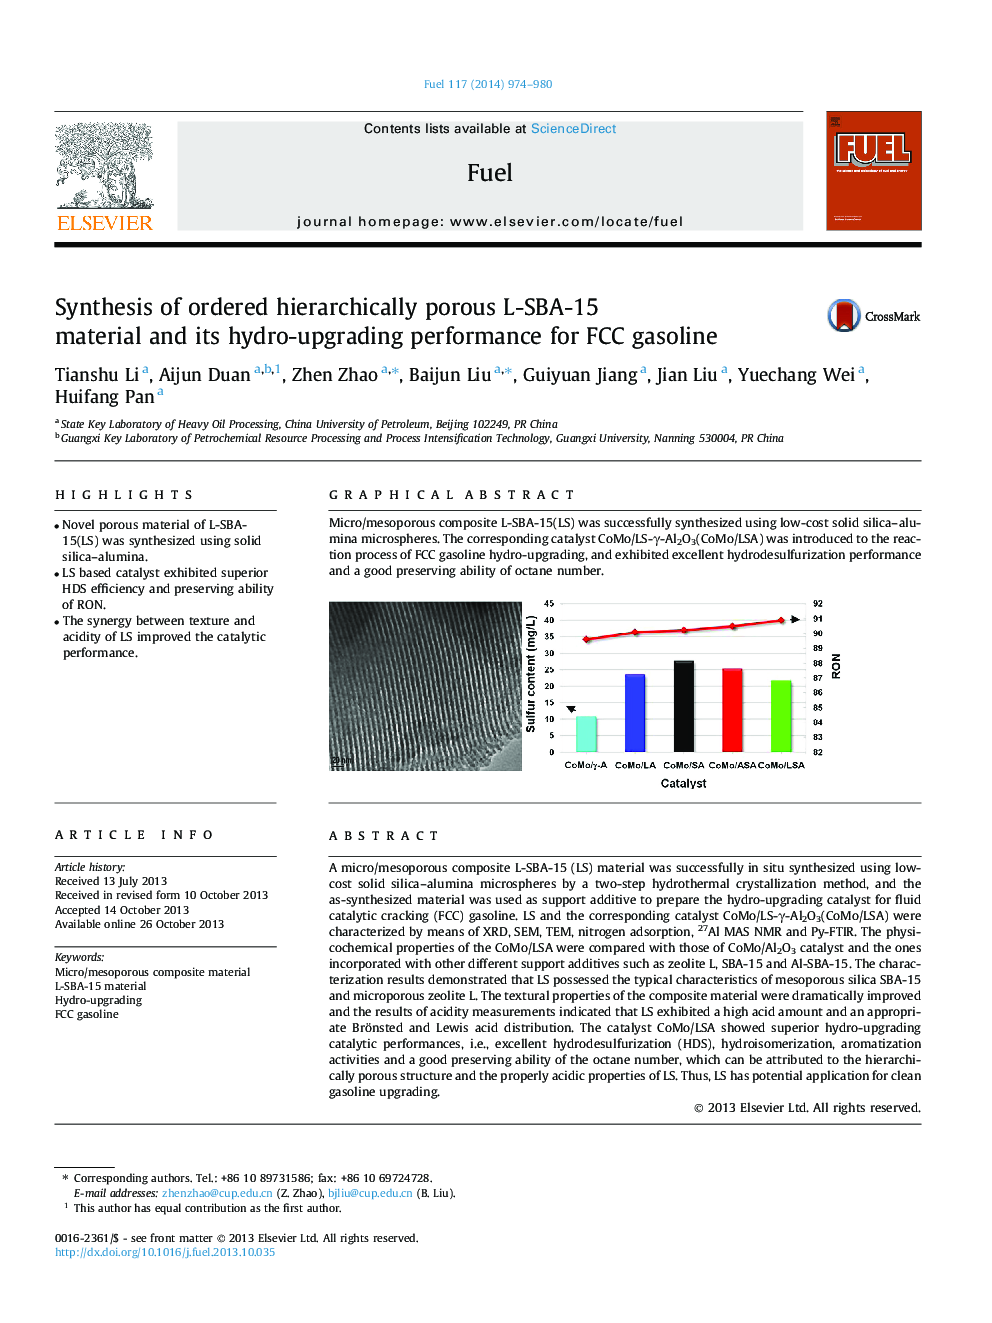 Synthesis of ordered hierarchically porous L-SBA-15 material and its hydro-upgrading performance for FCC gasoline